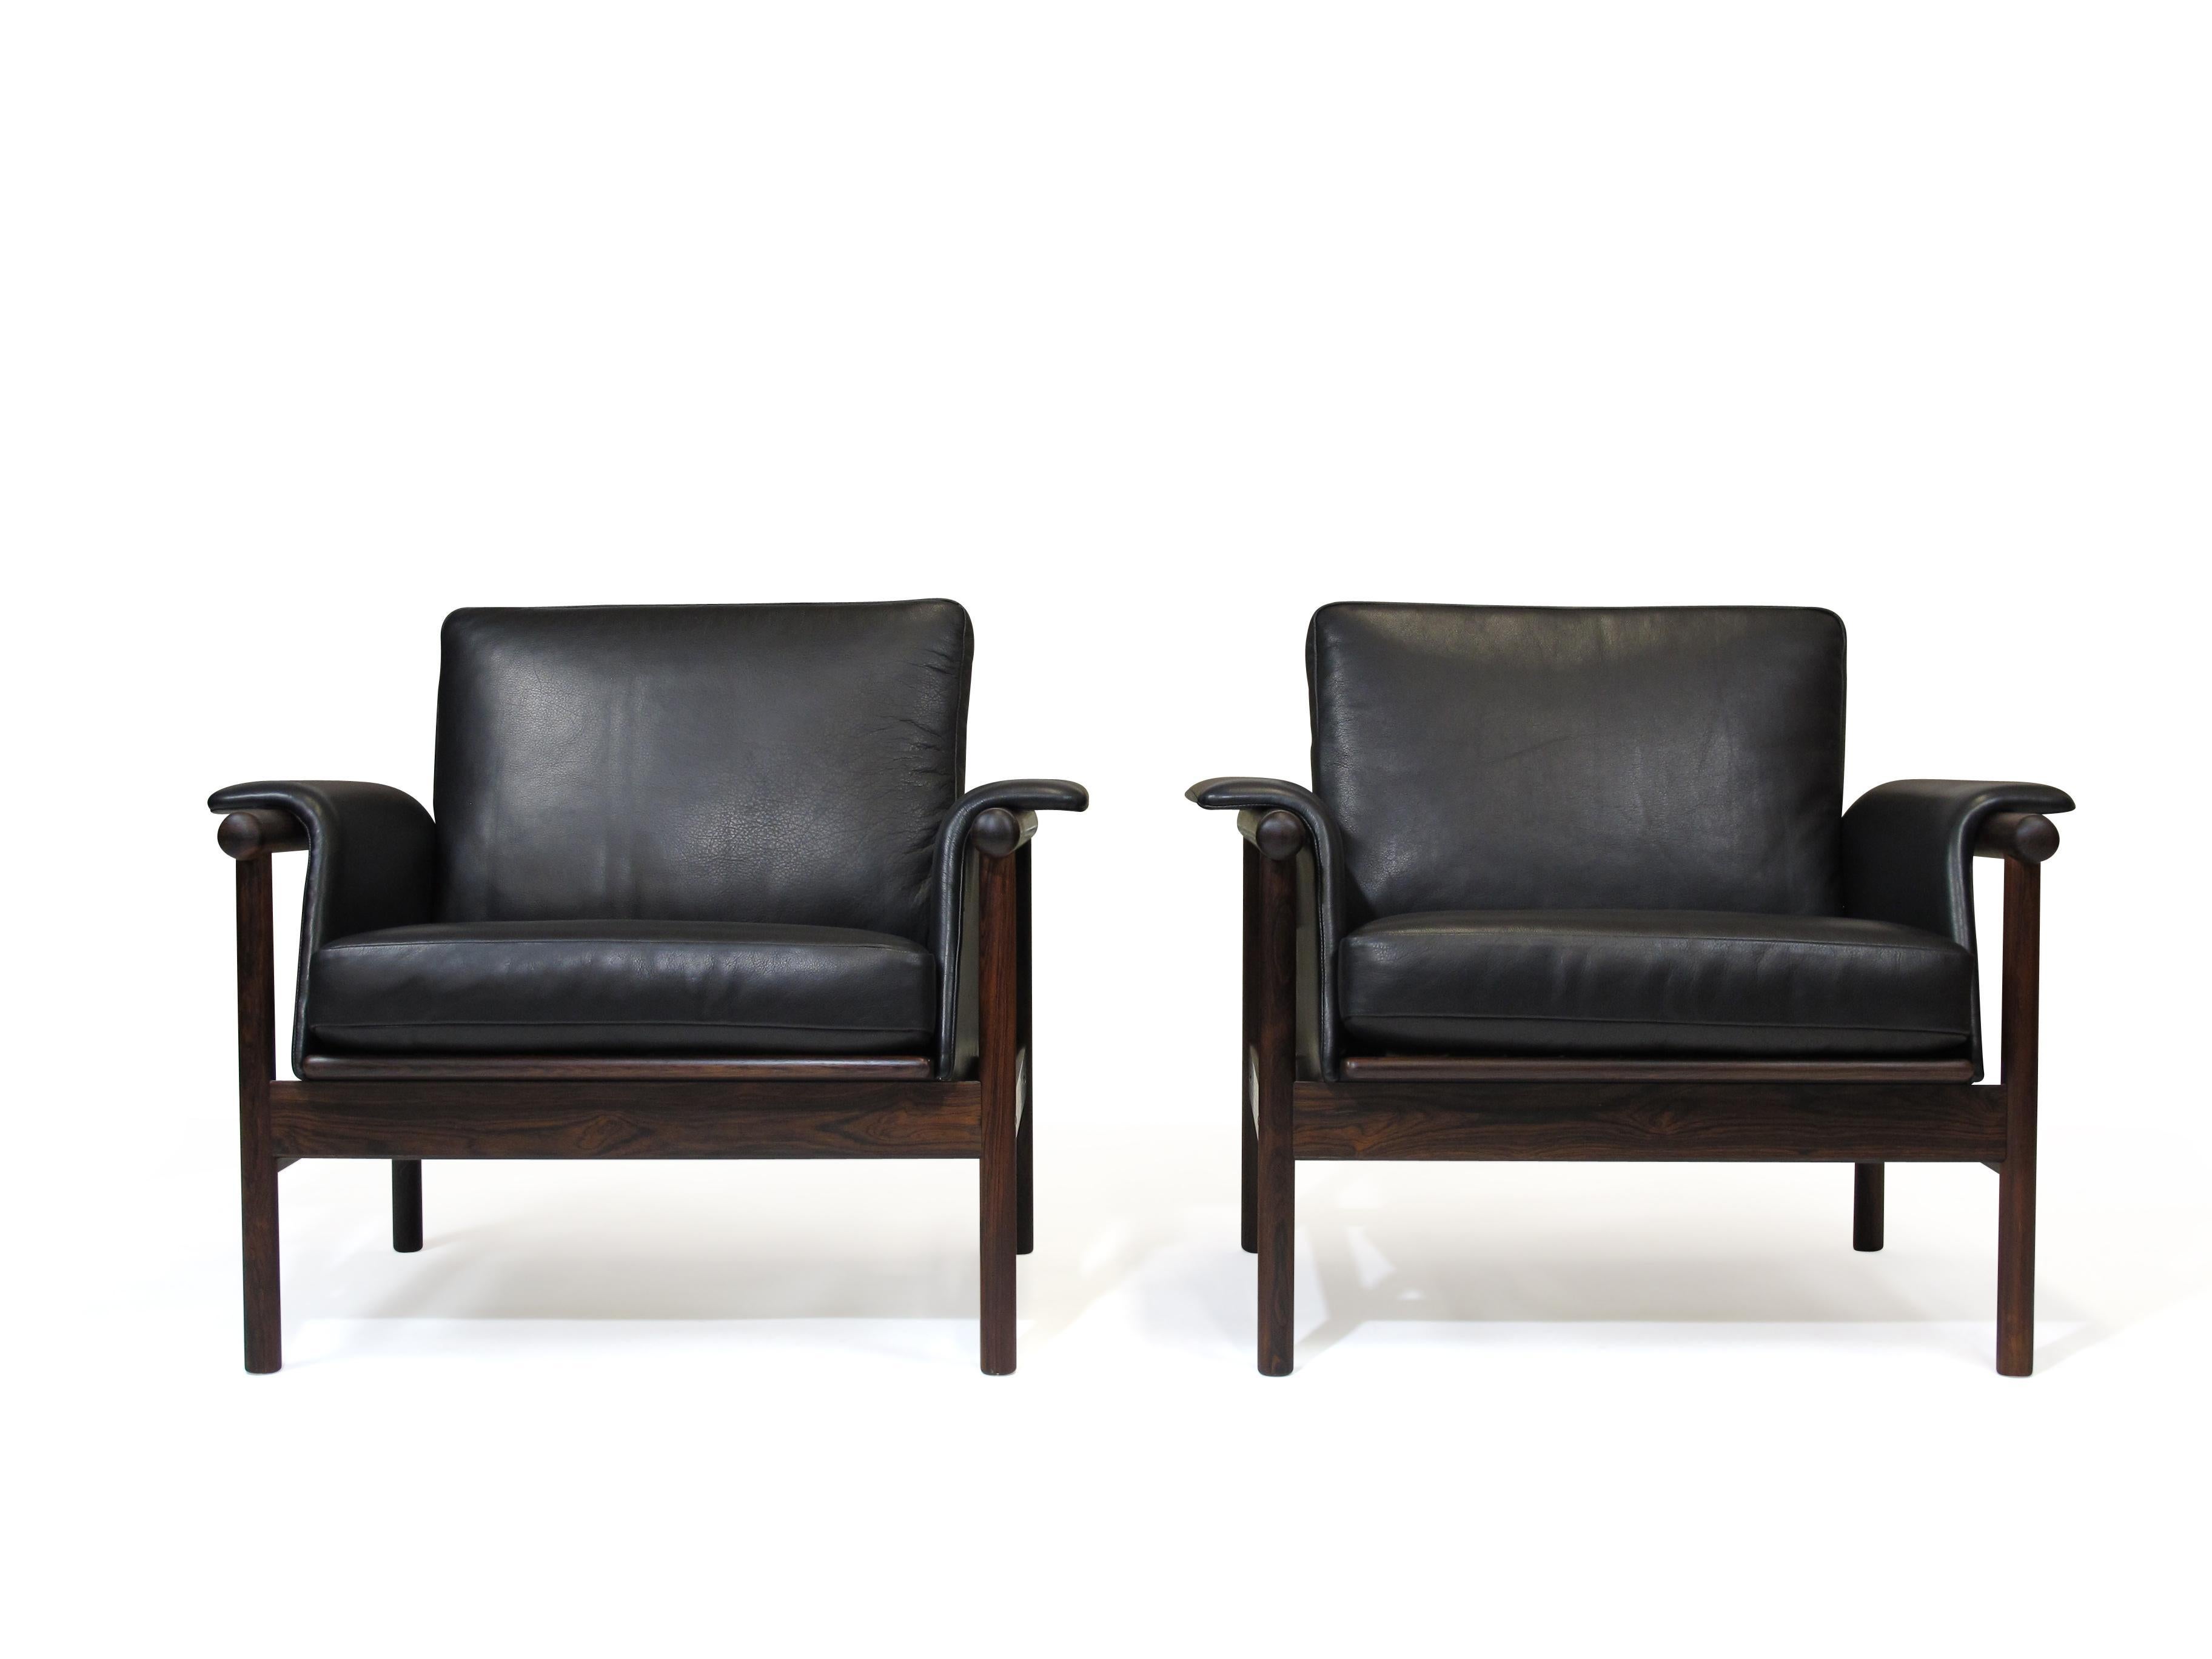 Pair of black leather and rosewood lounge chairs designed by Illum Wikkelsø by Koefoed's Møbelfabrik, Denmark, 1966. Features a solid Brazilian rosewood frame of dark un-faded rosewood, with slatted backrest and slightly rolled arms. Newly